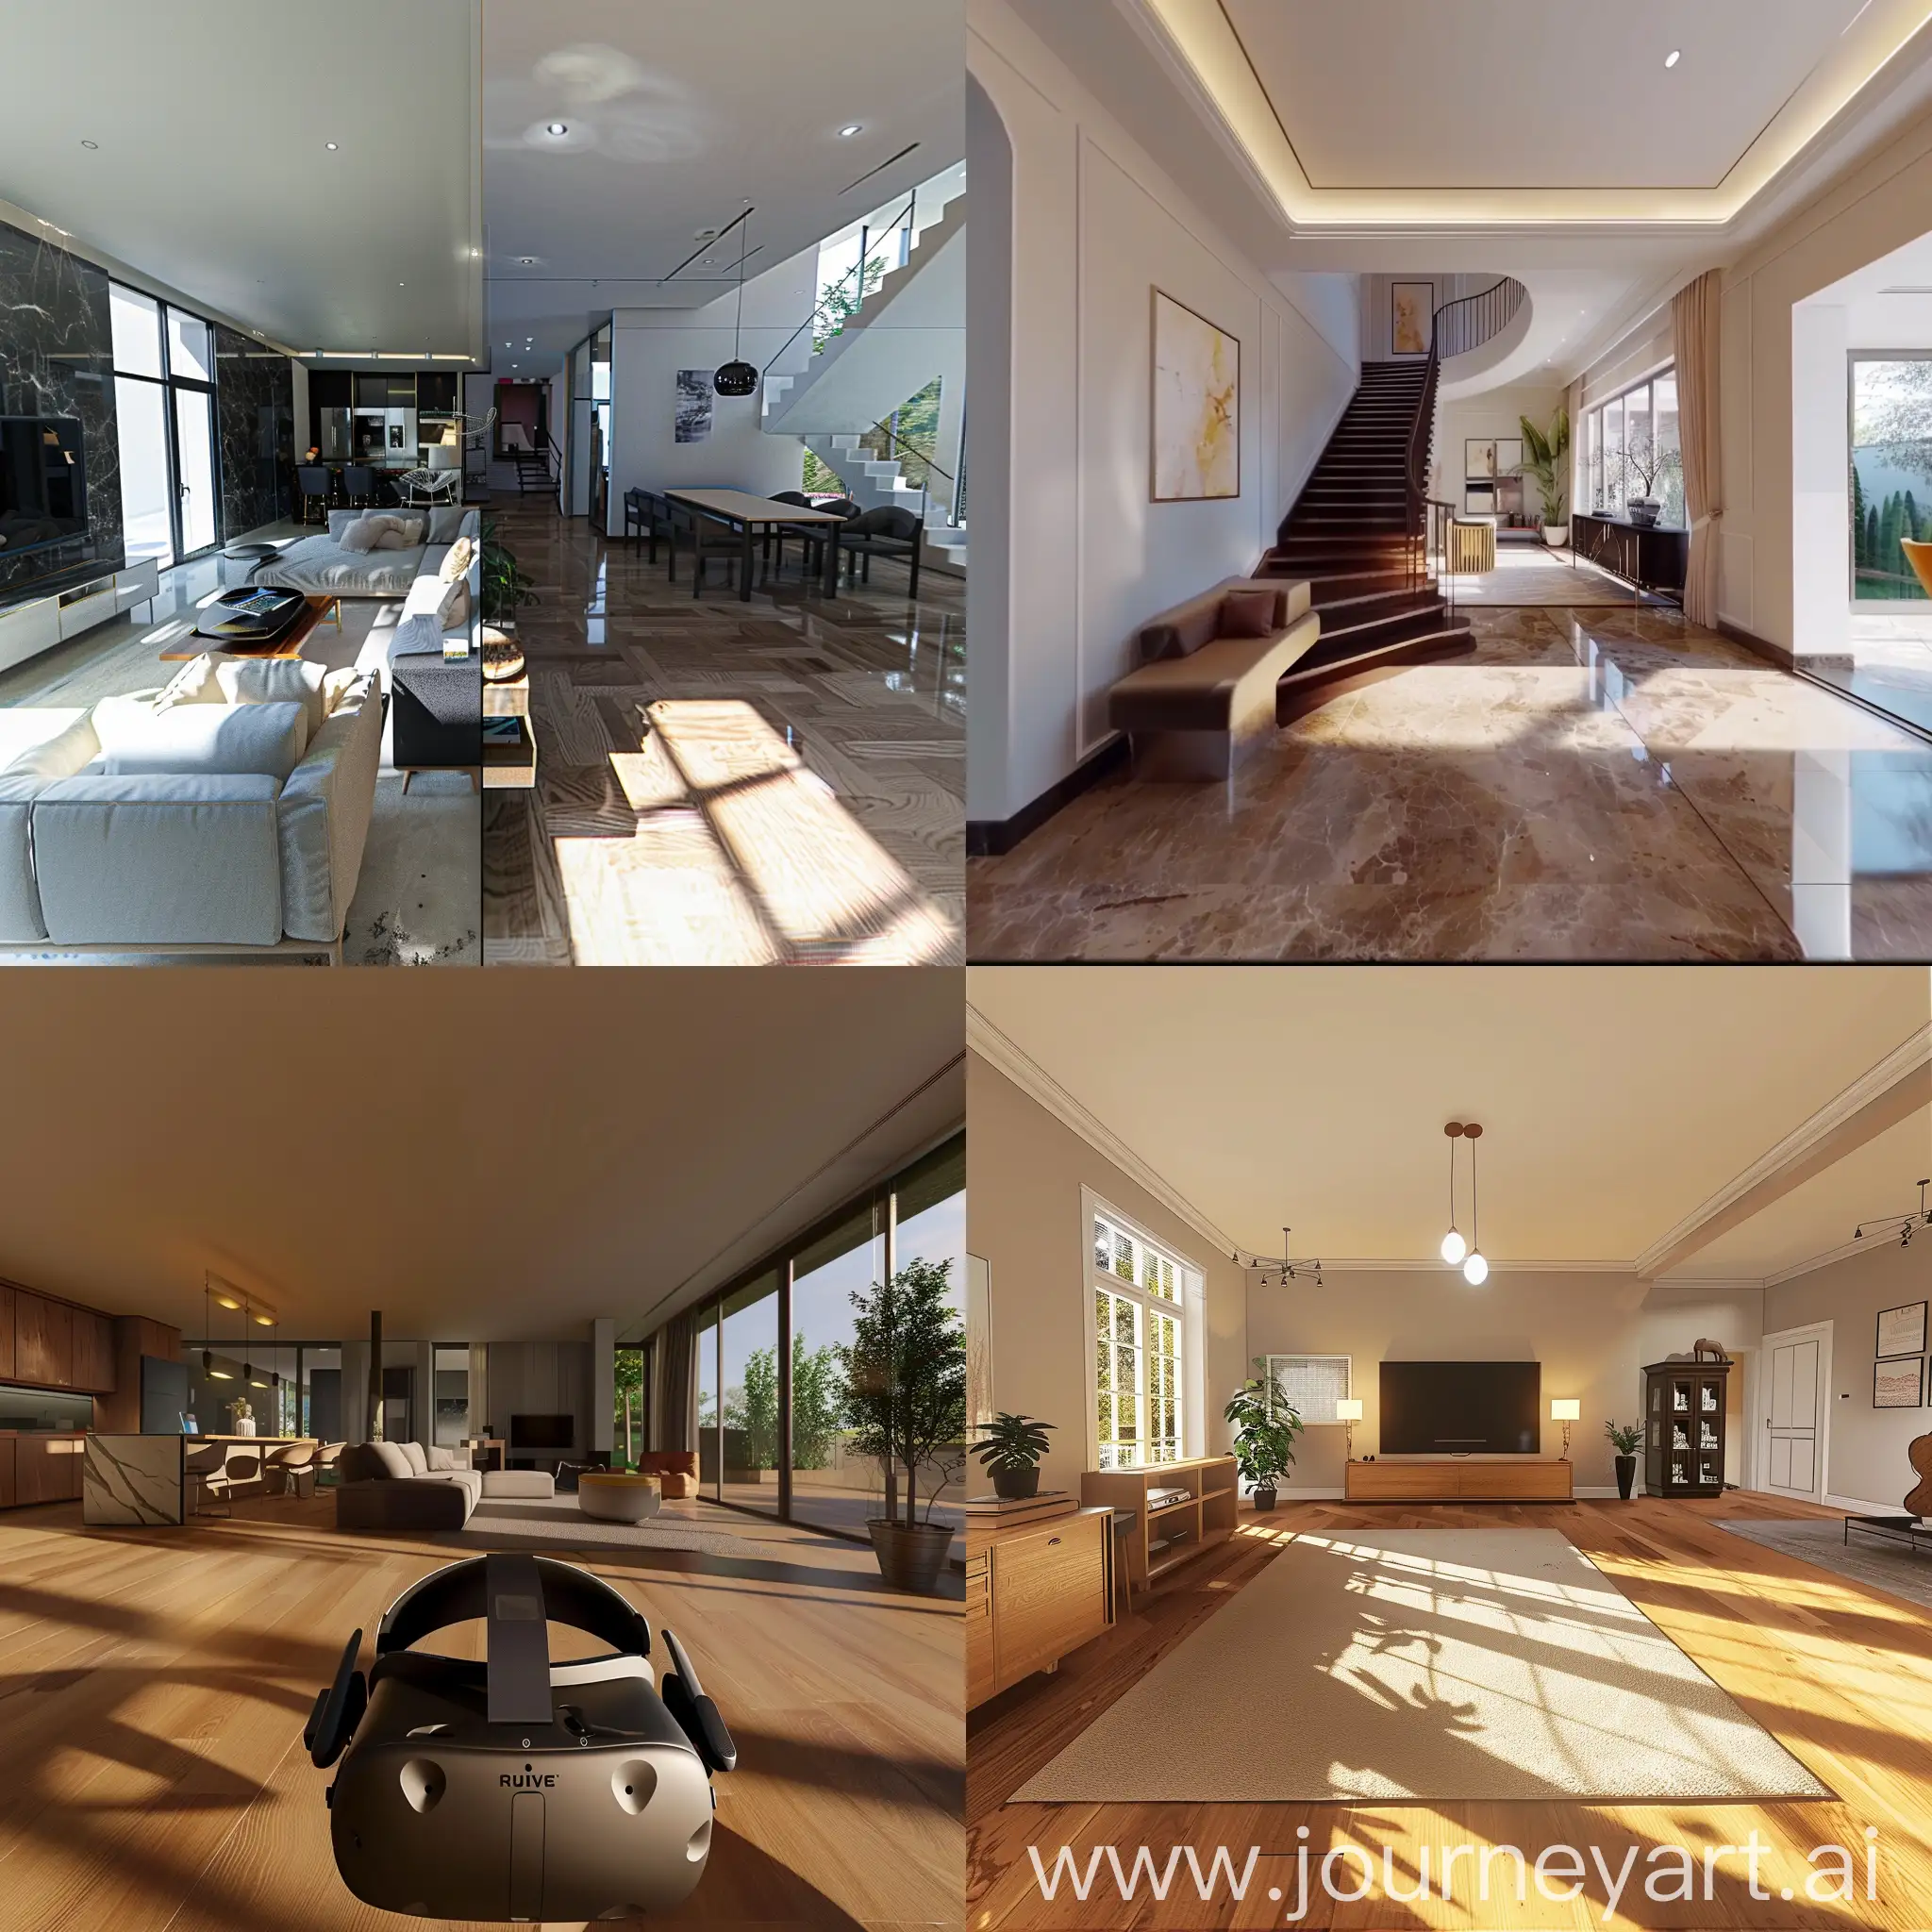 Immersive-Virtual-Reality-Real-Estate-Tour-in-Photorealistic-Style